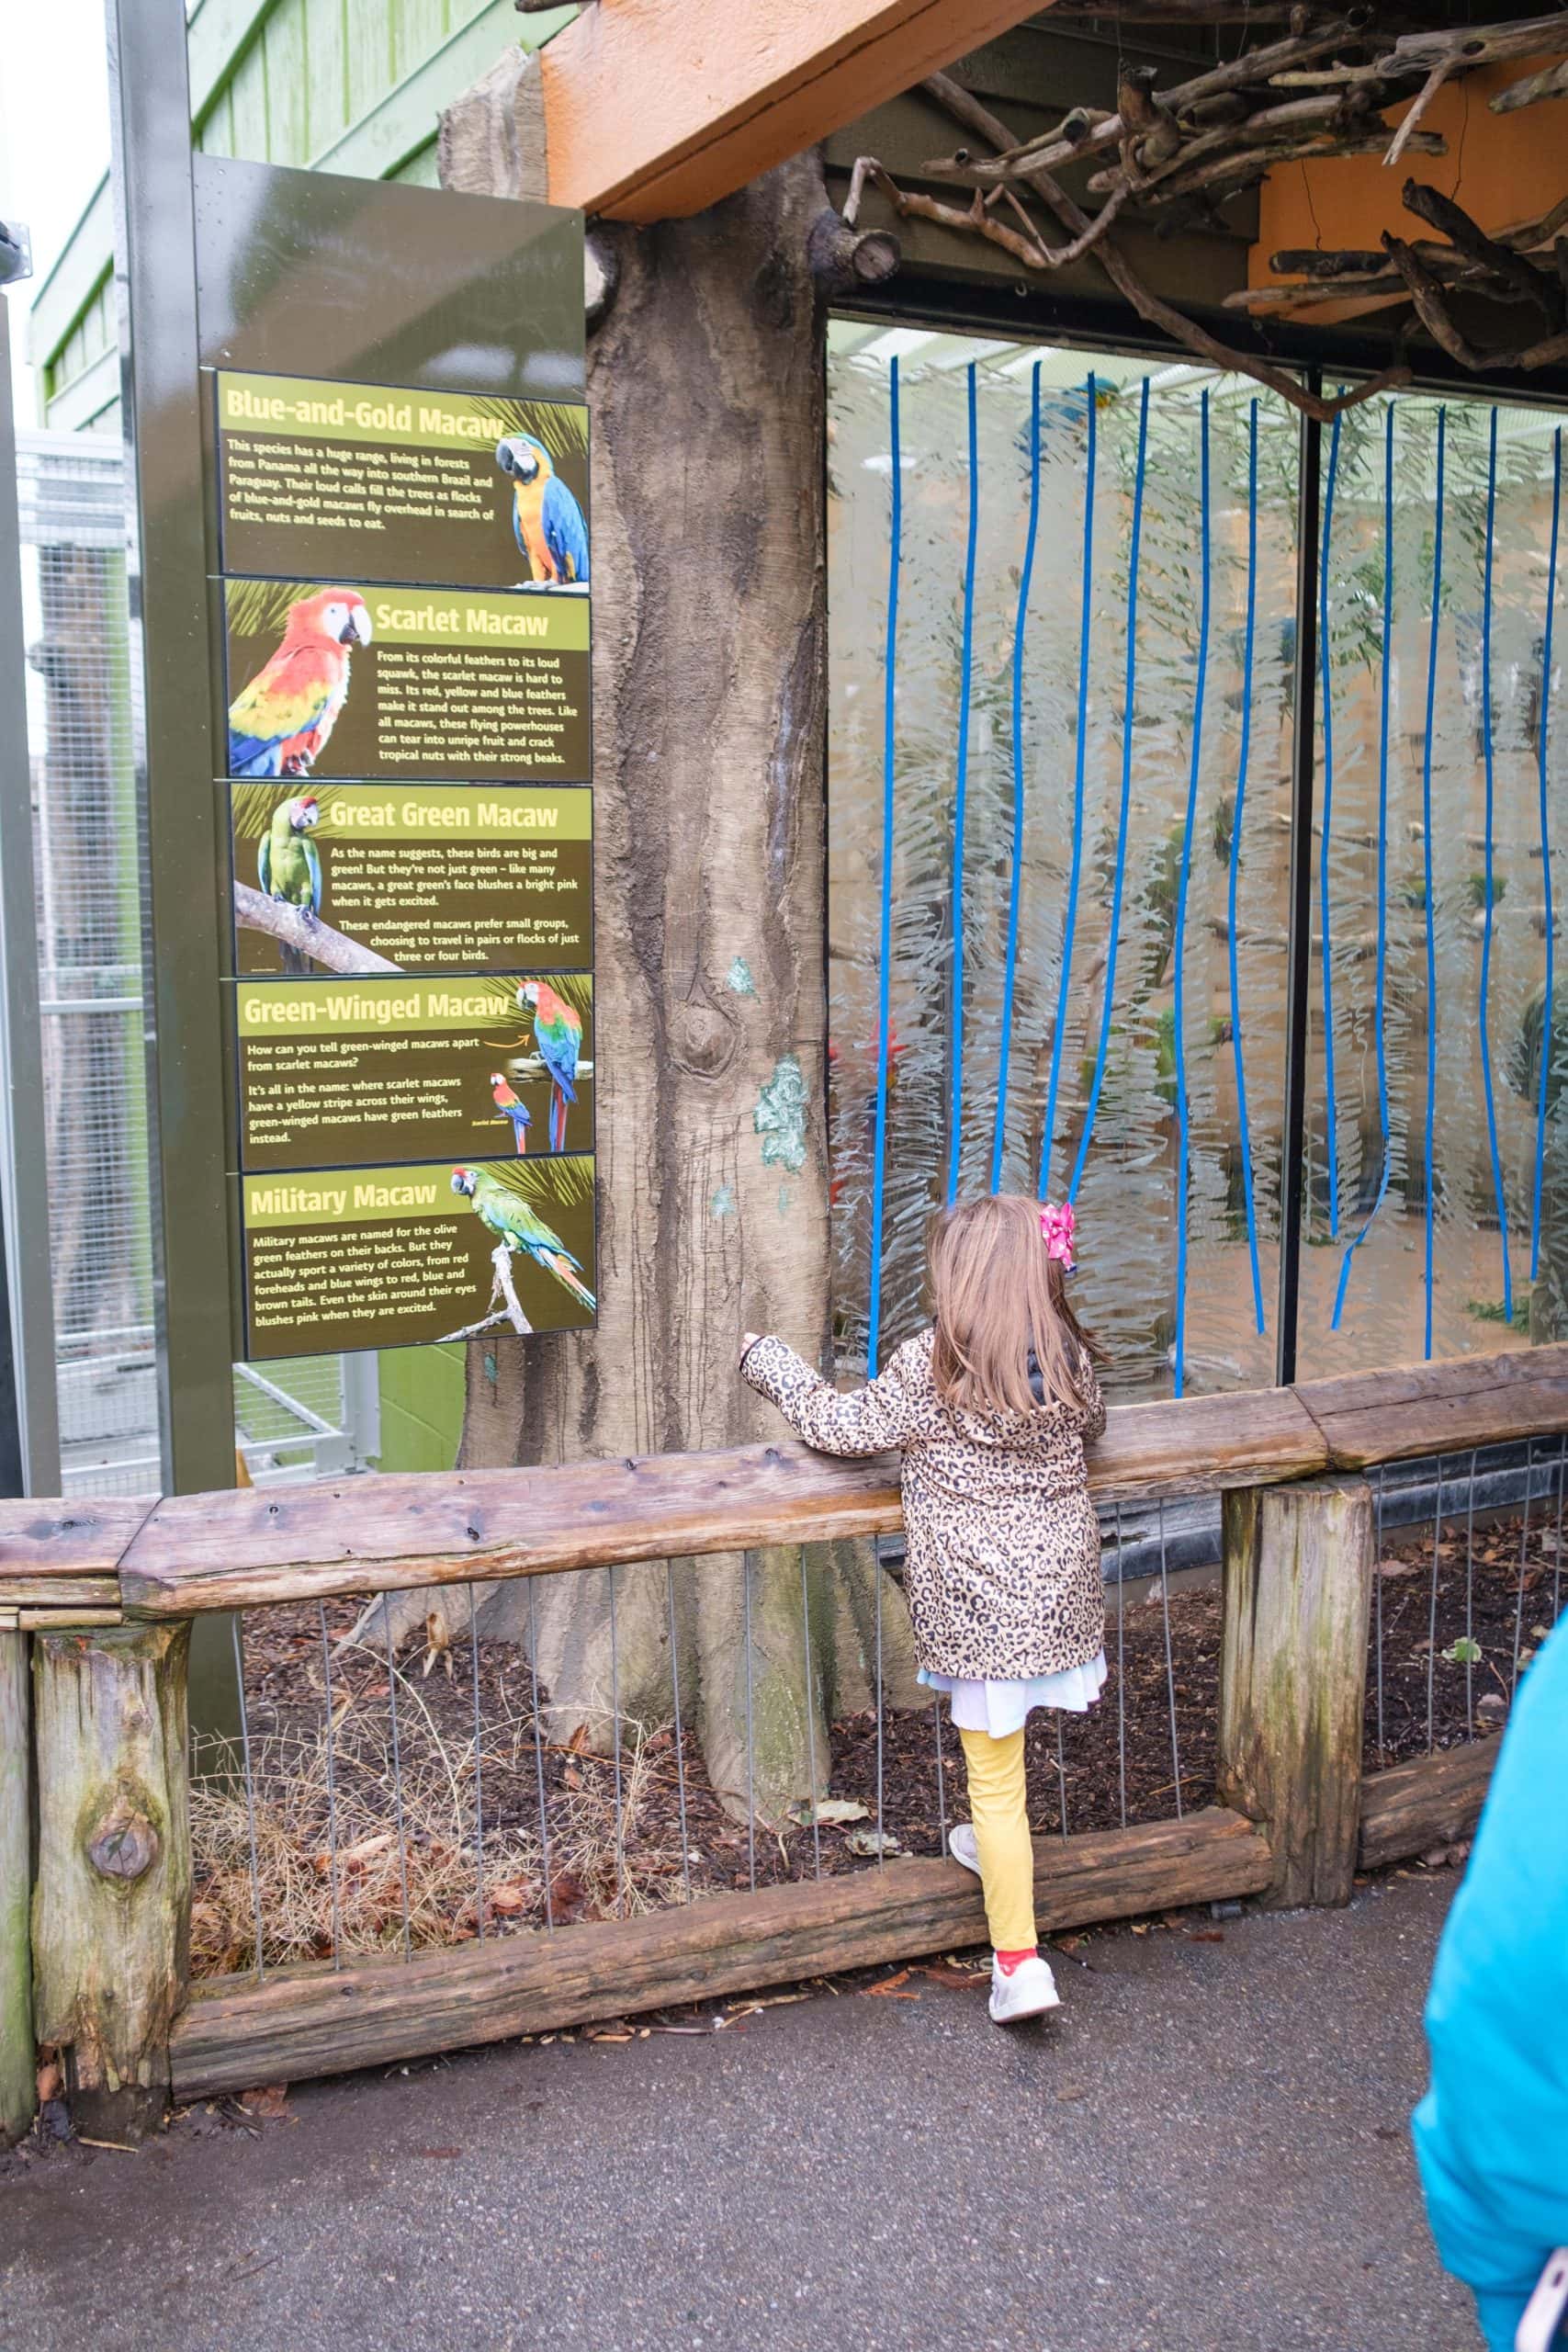 Child looking at tropical birds and parrots inside the Indianapolis Zoo.